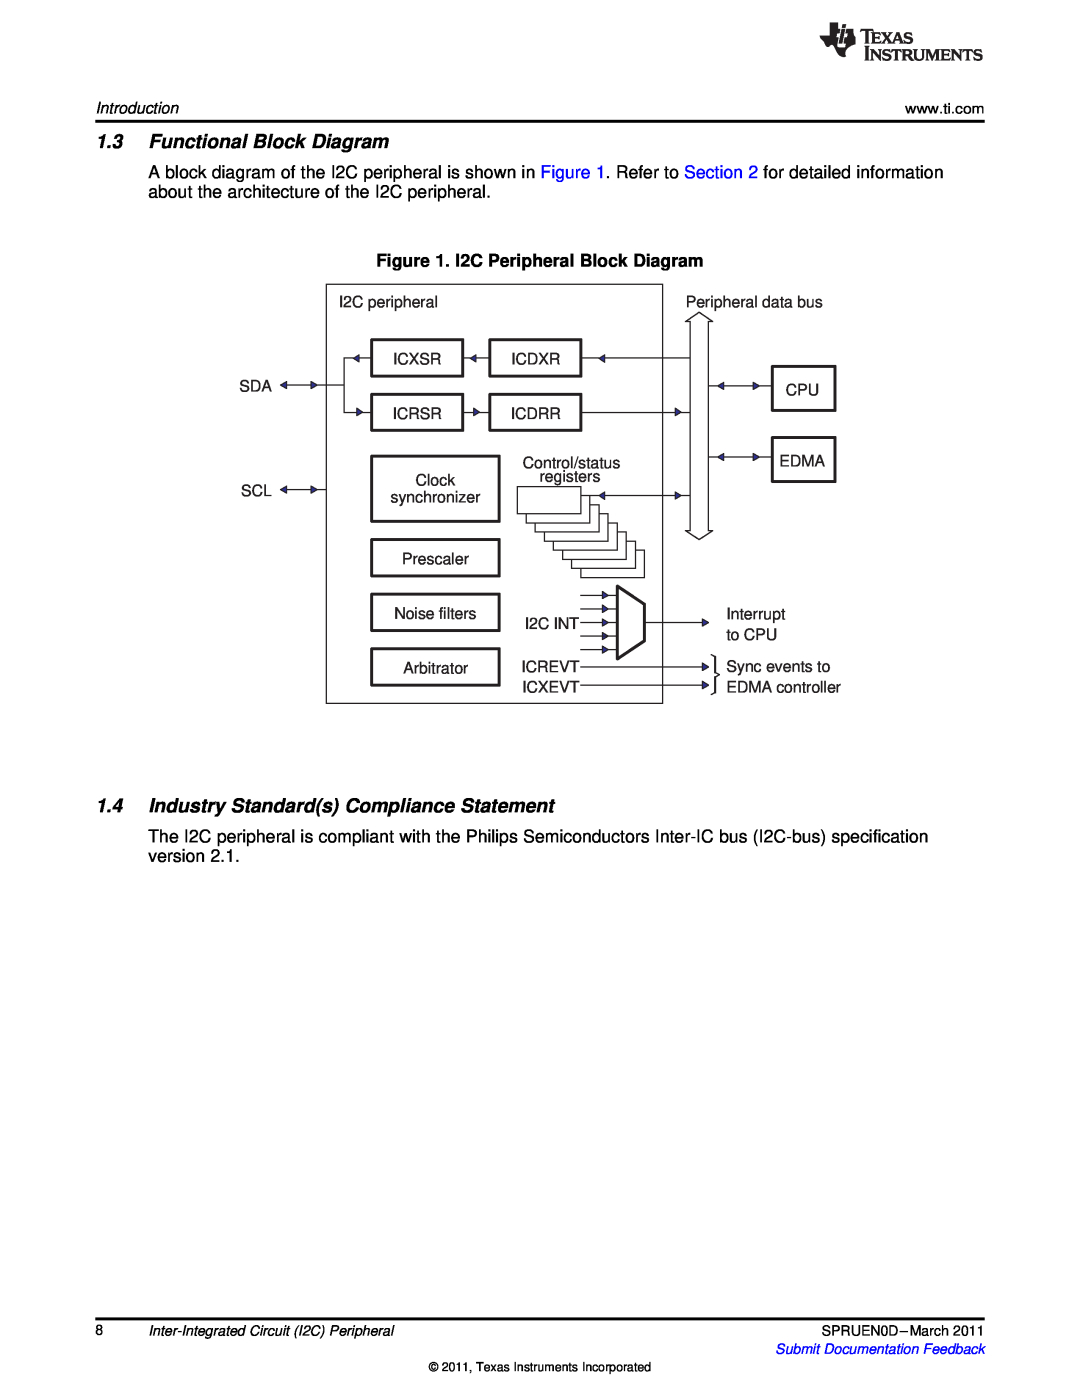 Texas Instruments TMS320C642X manual 1.3Functional Block Diagram, 1.4Industry Standards Compliance Statement 